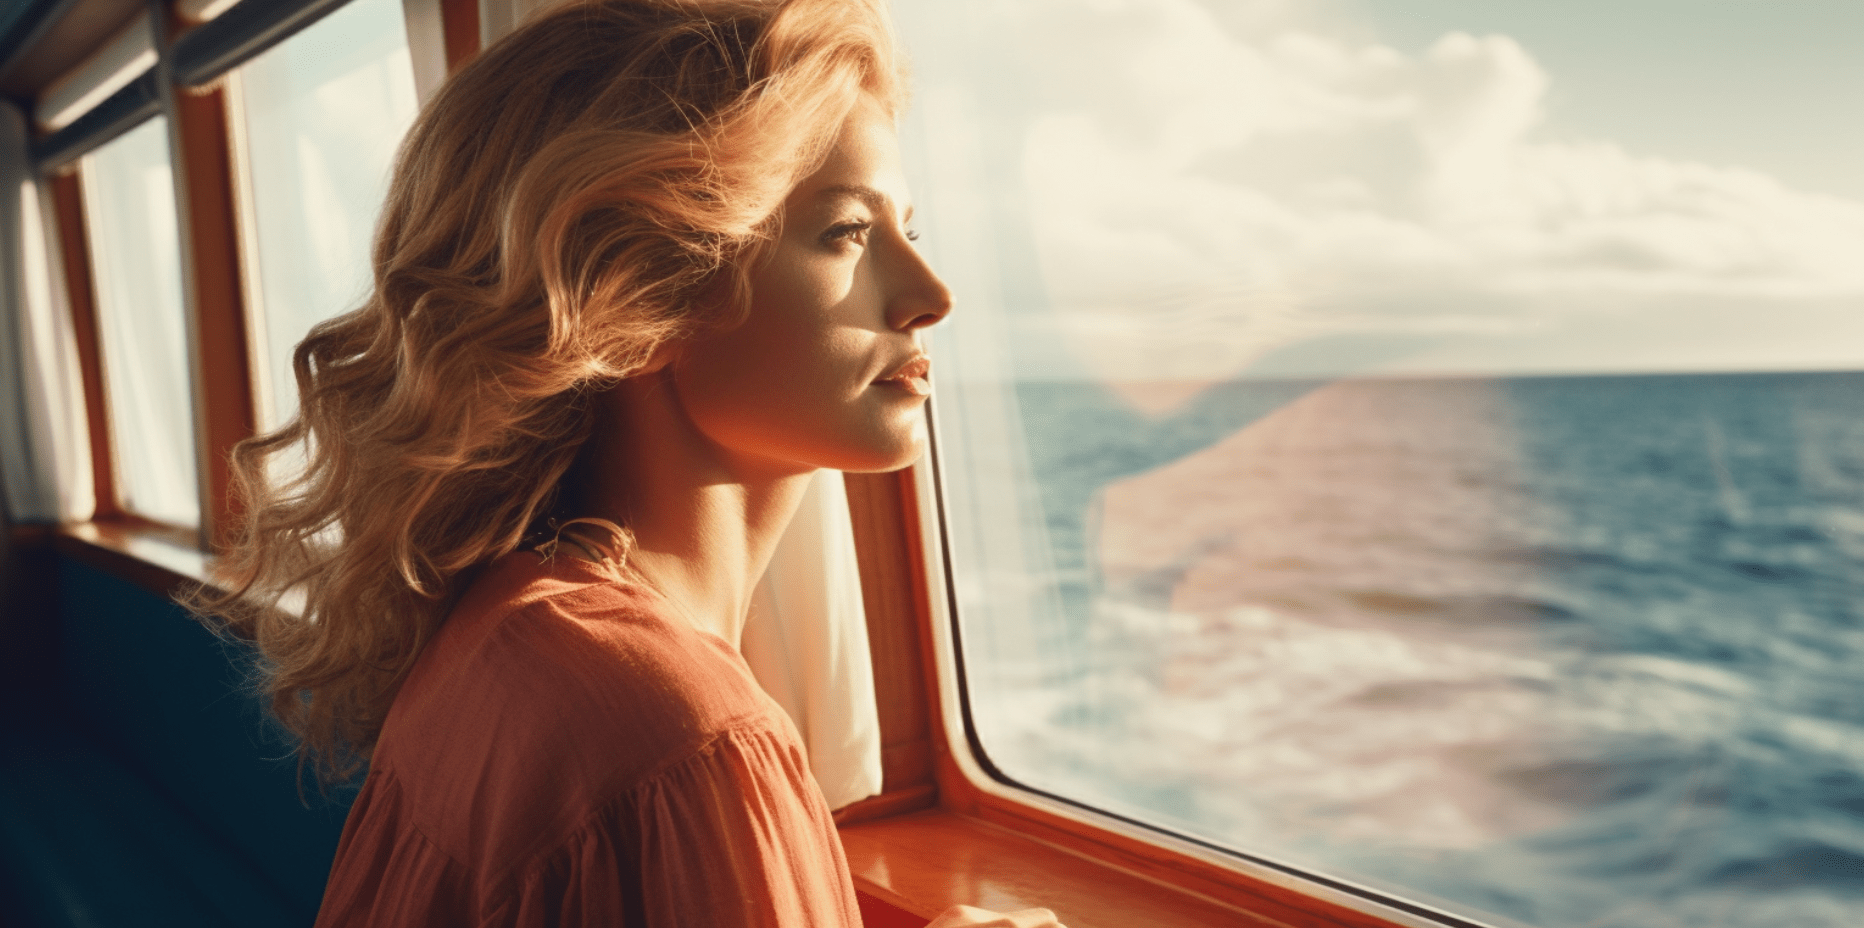 Woman On A Cruise